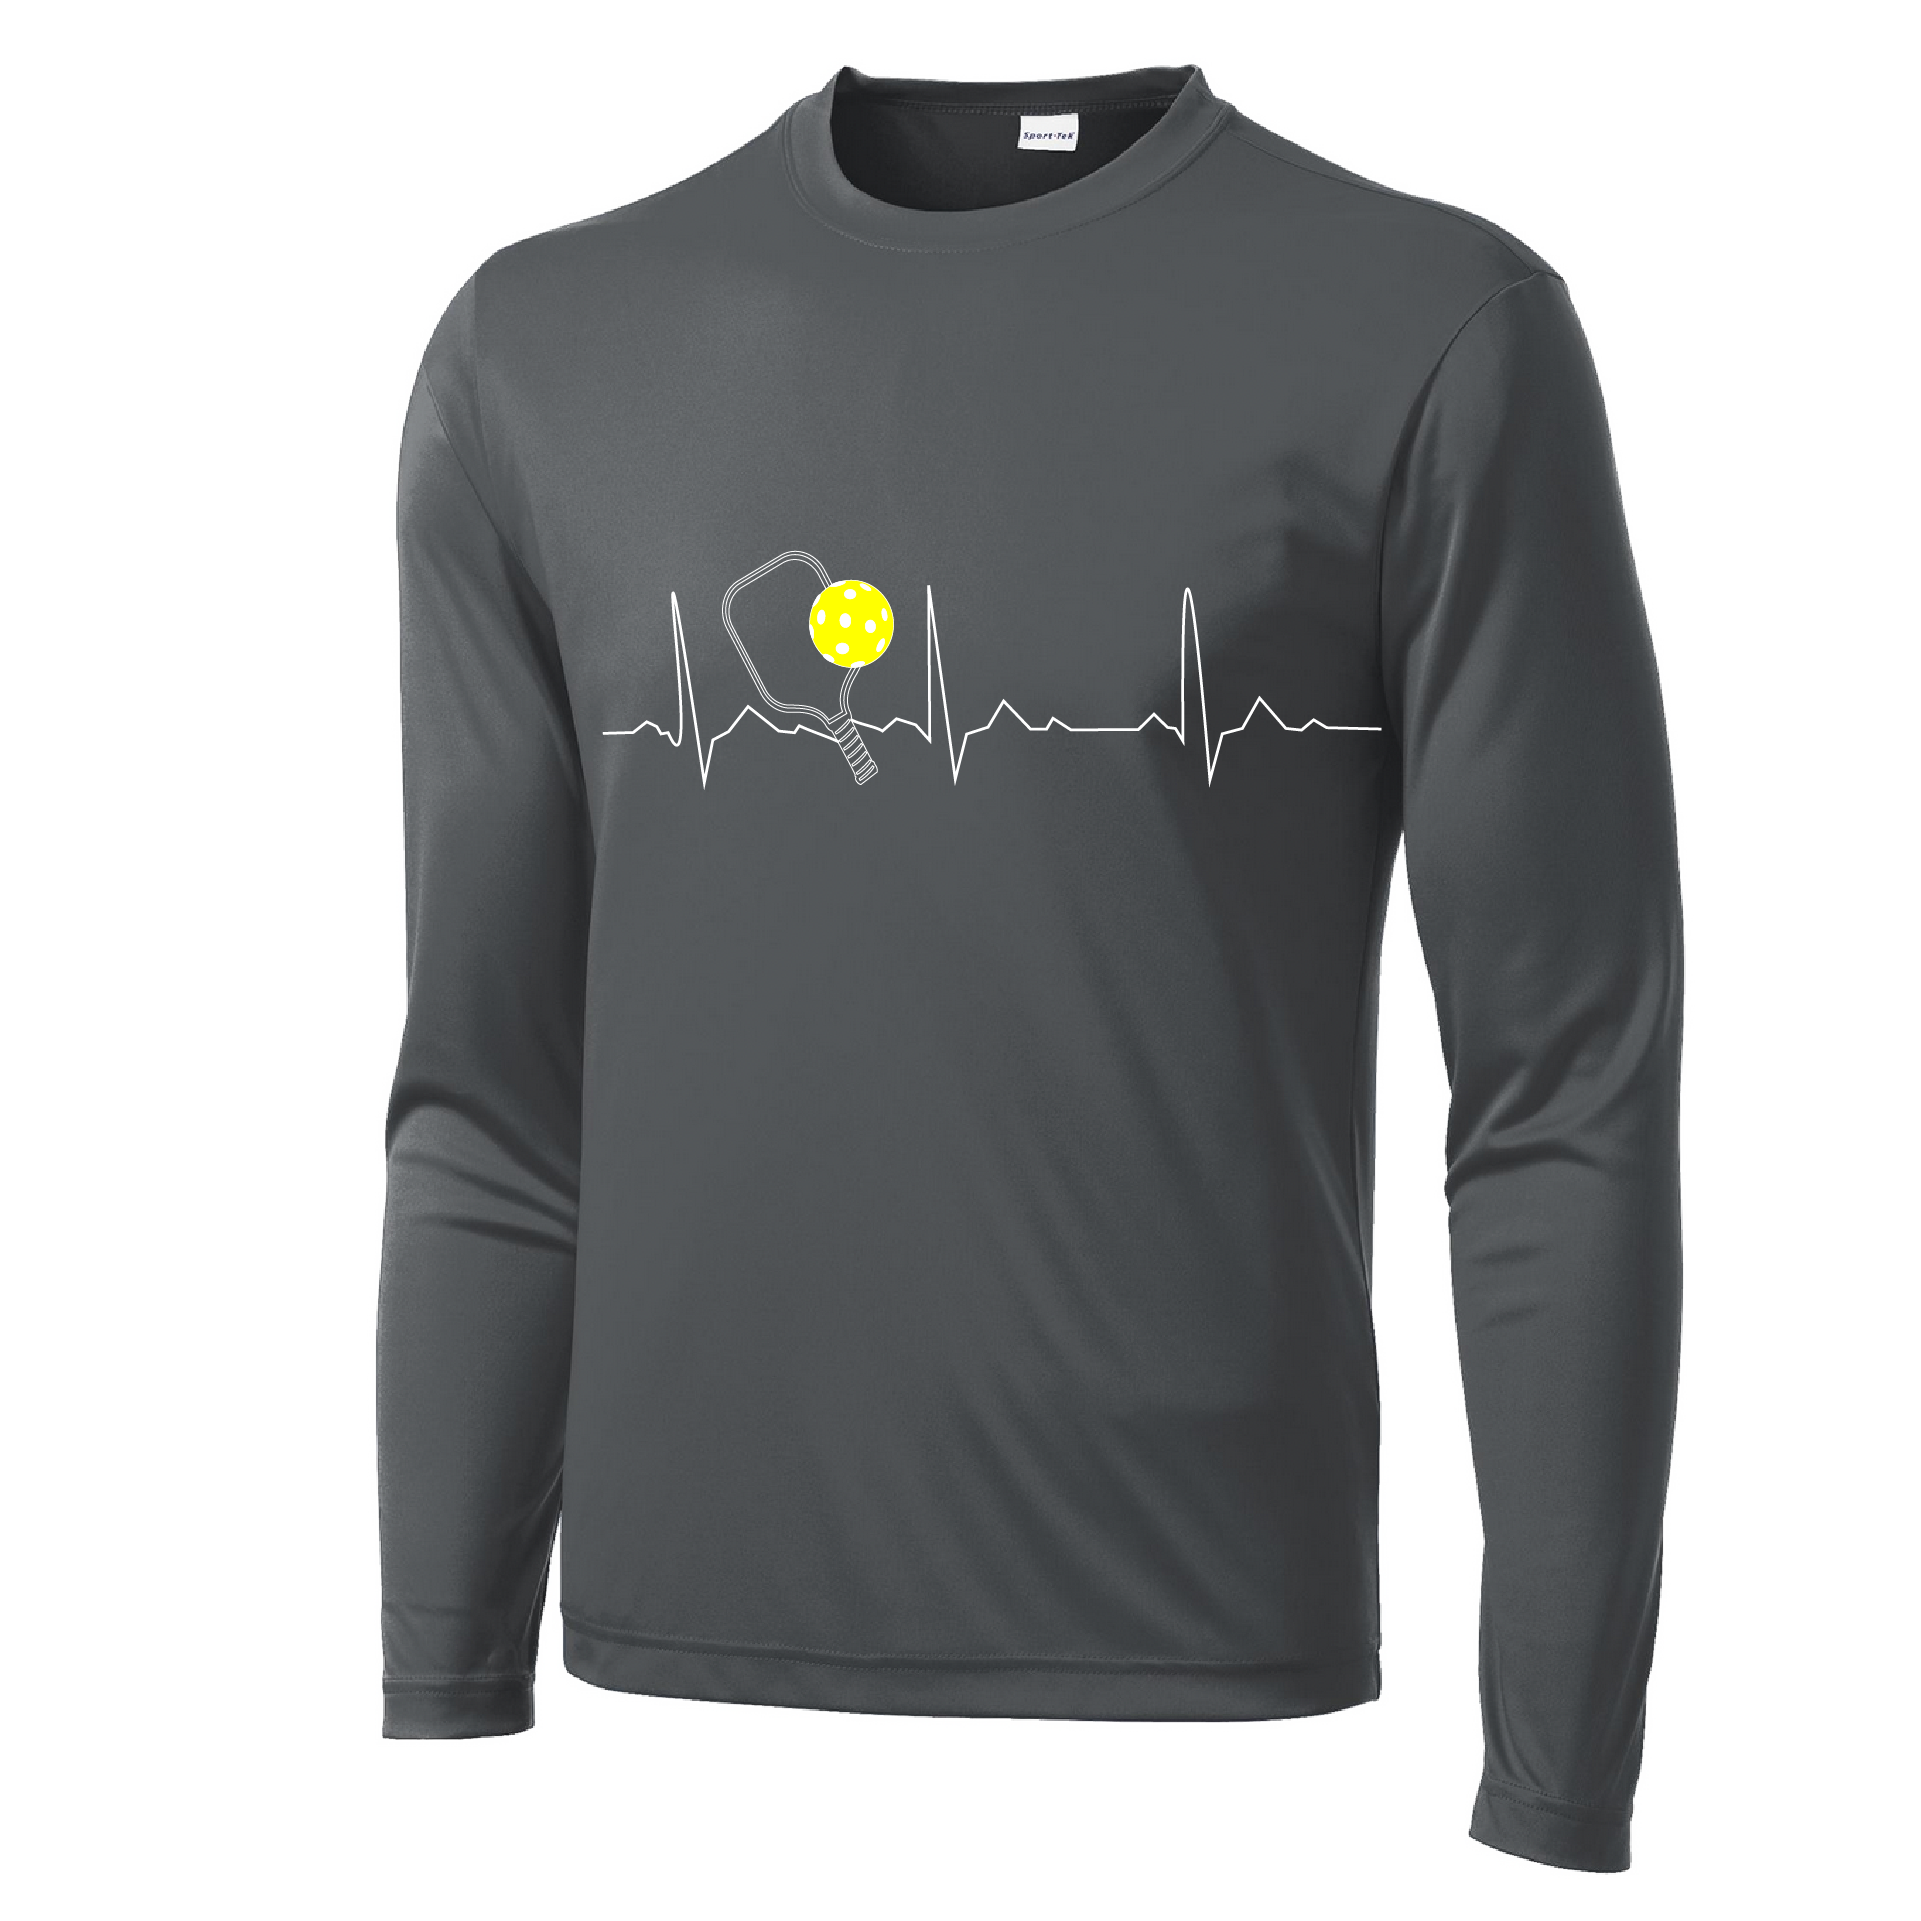 Pickleball Design: Heartbeat  Men's Style: Long Sleeve  Shirts are lightweight, roomy and highly breathable. These moisture-wicking shirts are designed for athletic performance. They feature PosiCharge technology to lock in color and prevent logos from fading. Removable tag and set-in sleeves for comfort.